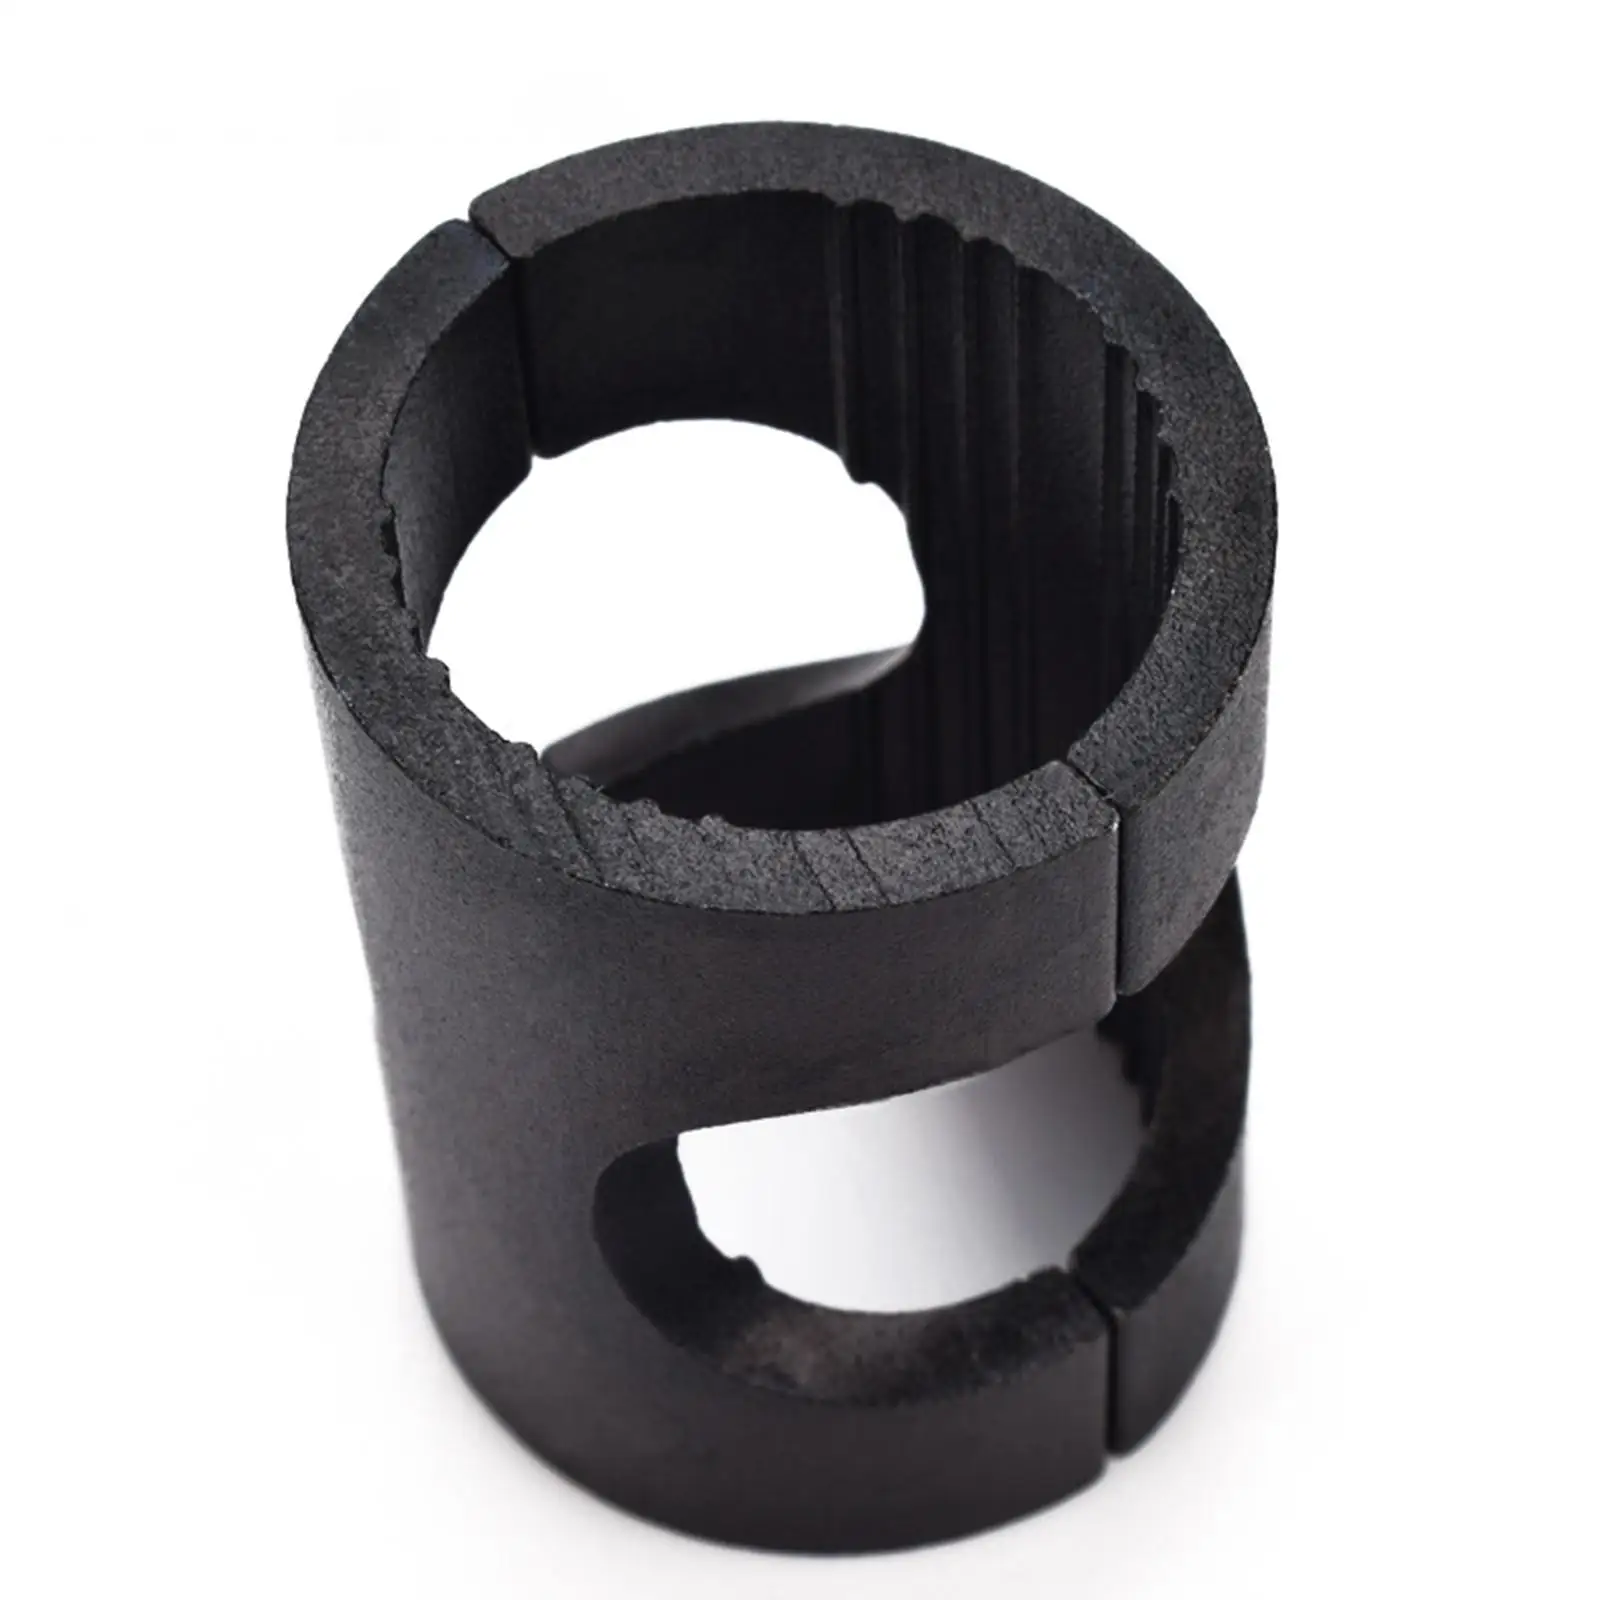 Stem Reducer Bike Handlebar Shim Spacer 31.8mm to 25.4mm Durable Easy to Intall